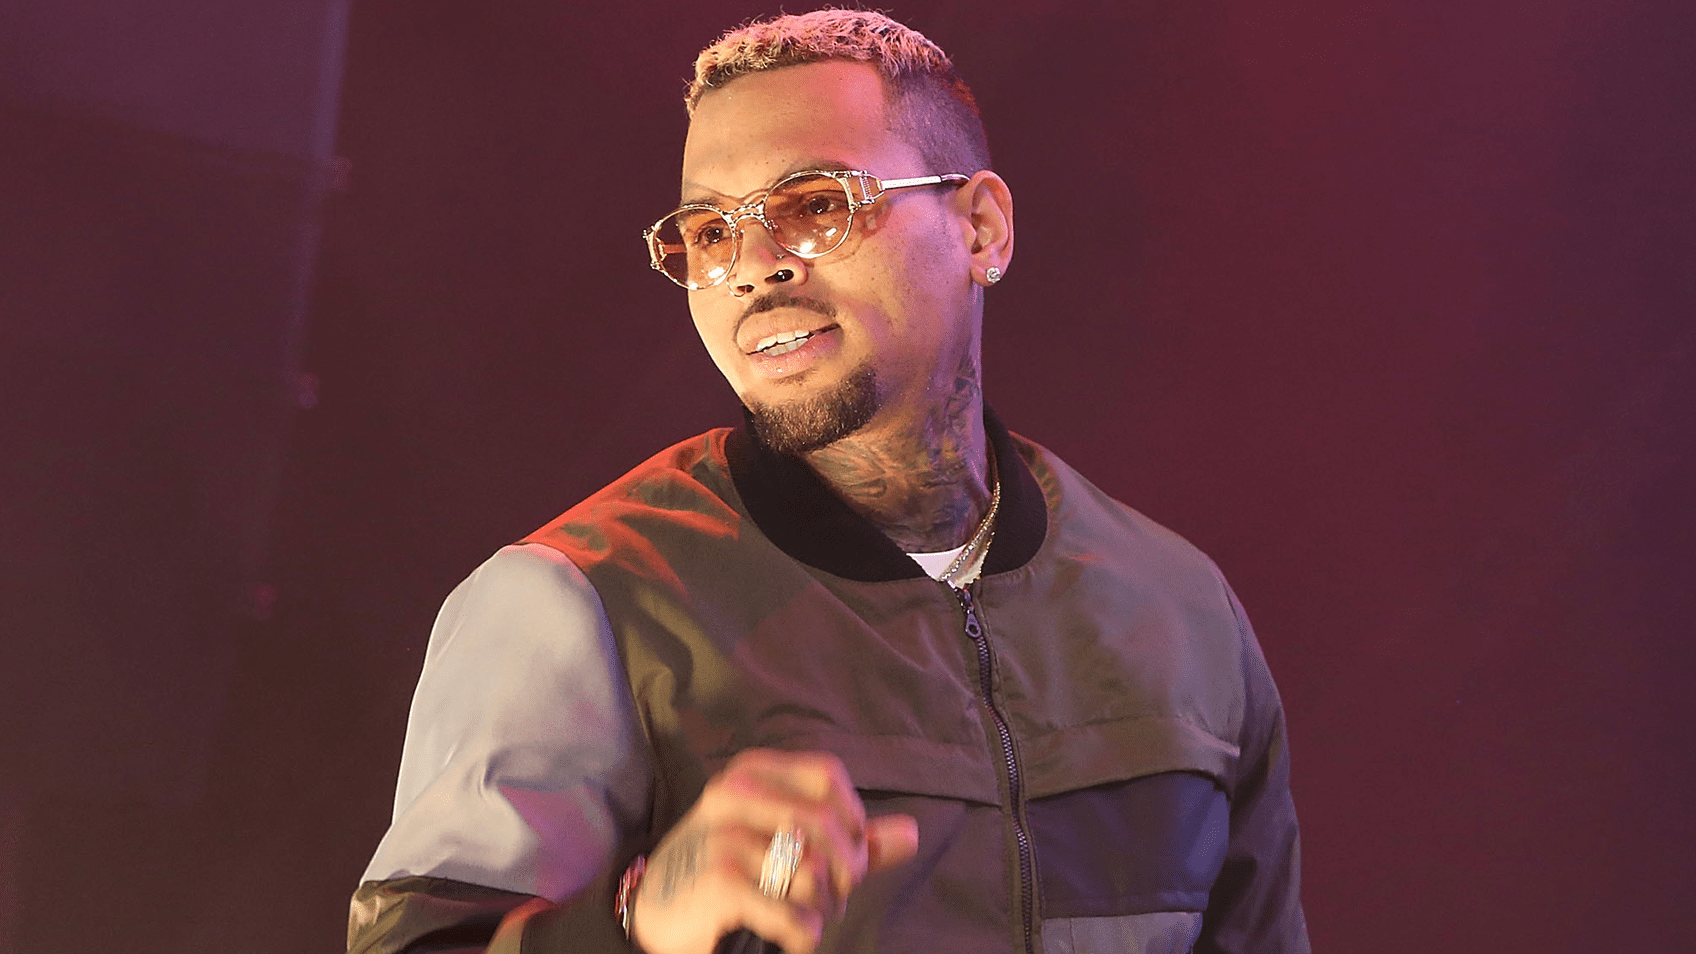 chris-brown-responds-after-being-sued-by-a-woman-who-alleges-that-he-raped-her